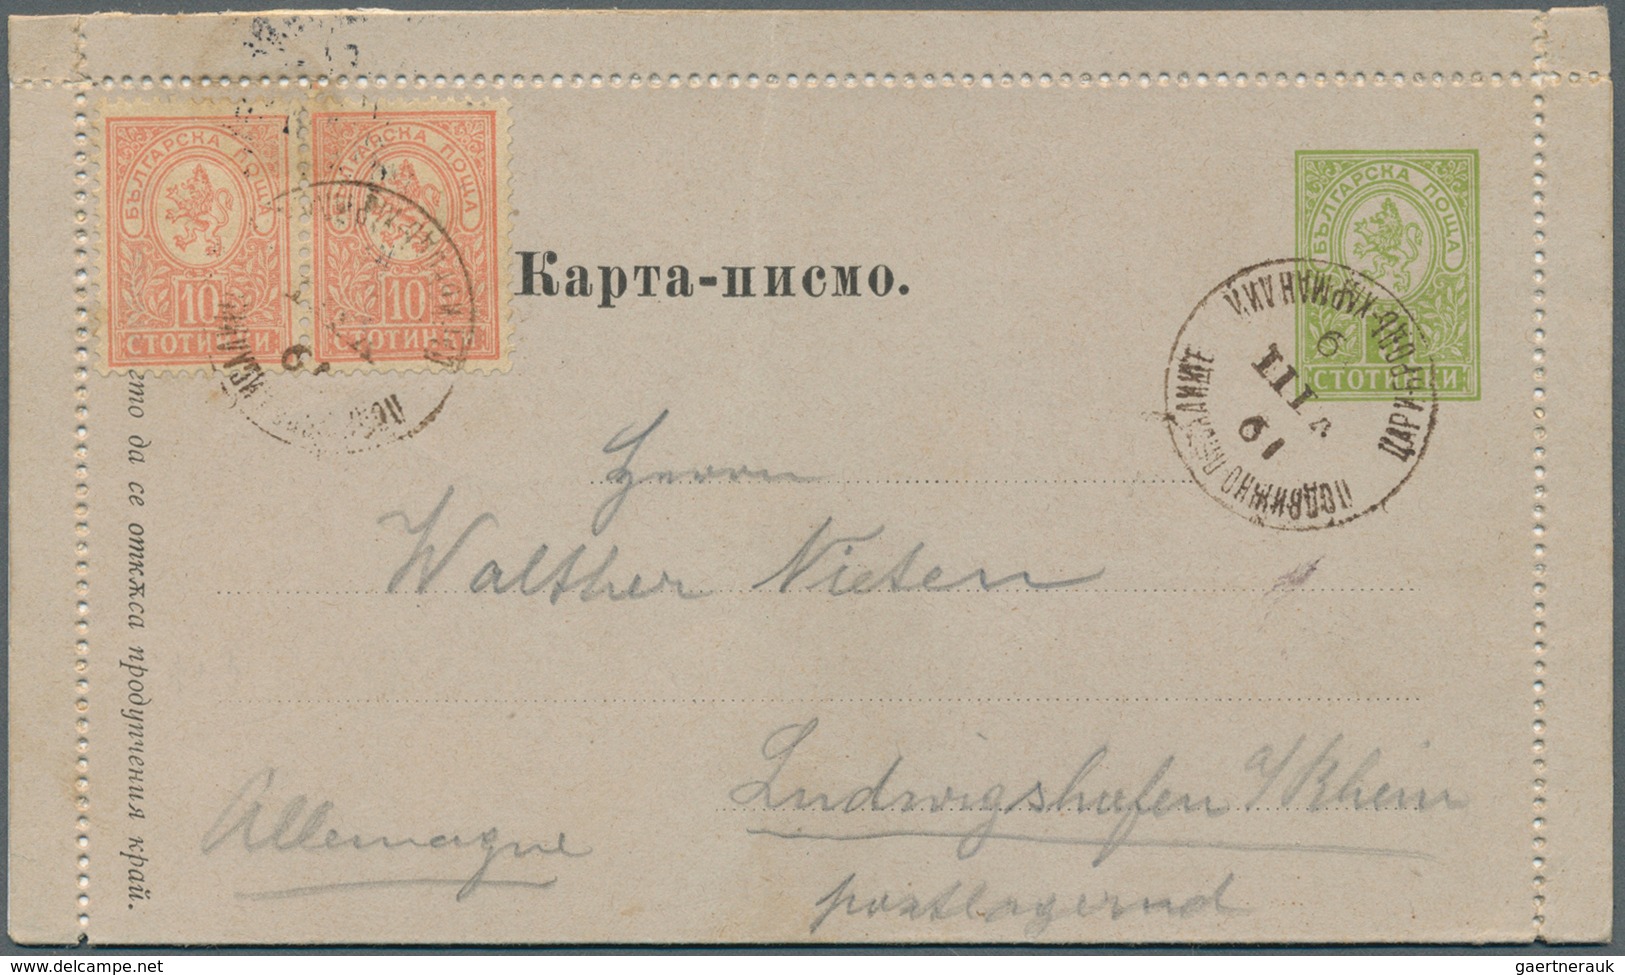 26182 Bulgarien: 1862/1945, collection of 33 entires incl. 1879 1fr. black/red on reverse of cover from So